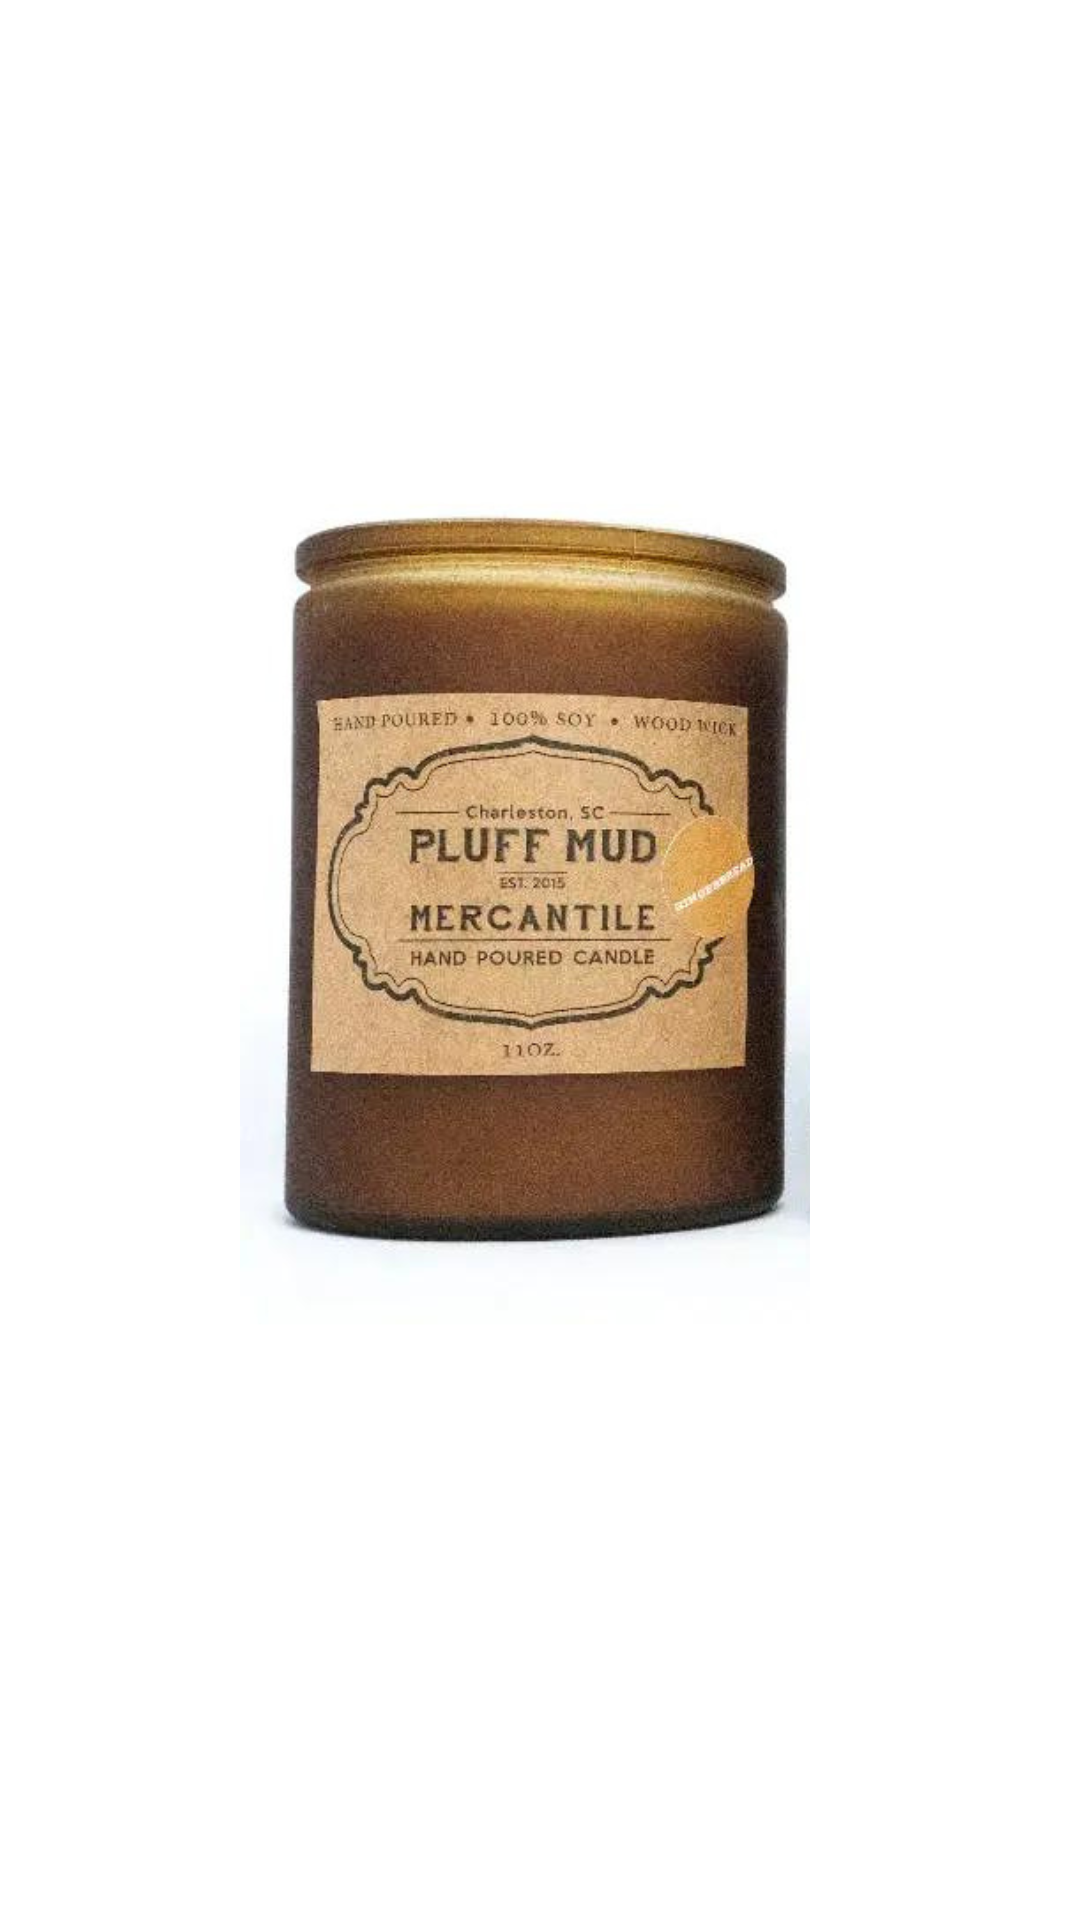 Gather Hand Poured Soy Candle - Pluff Mud Mercantile